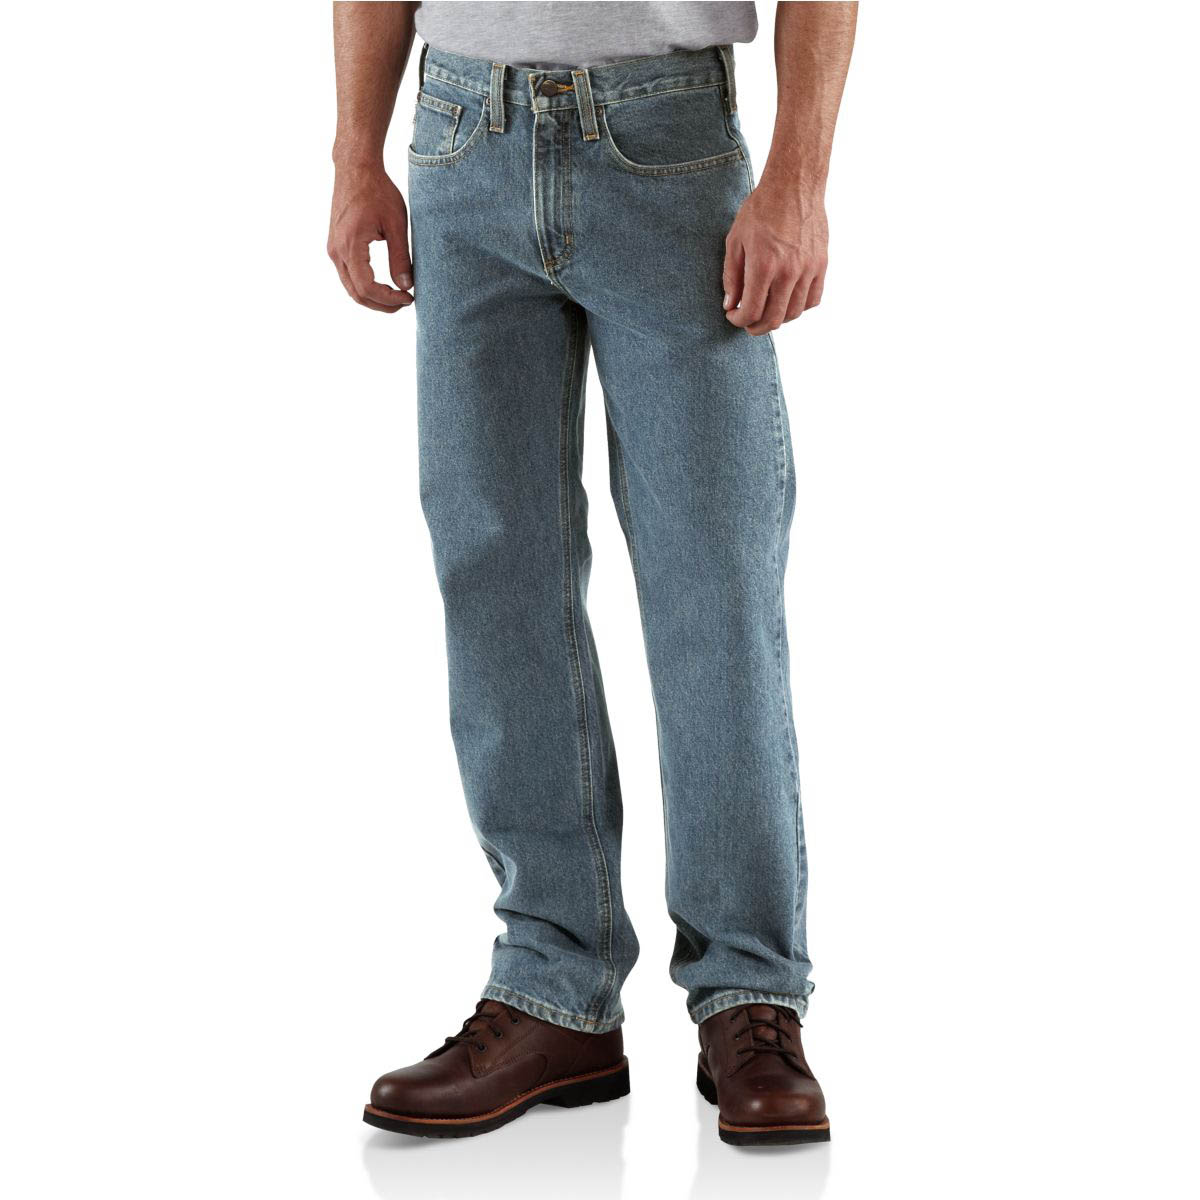 Carhartt Men's Traditional Fit Jean Straight Leg Discontinued Pricing